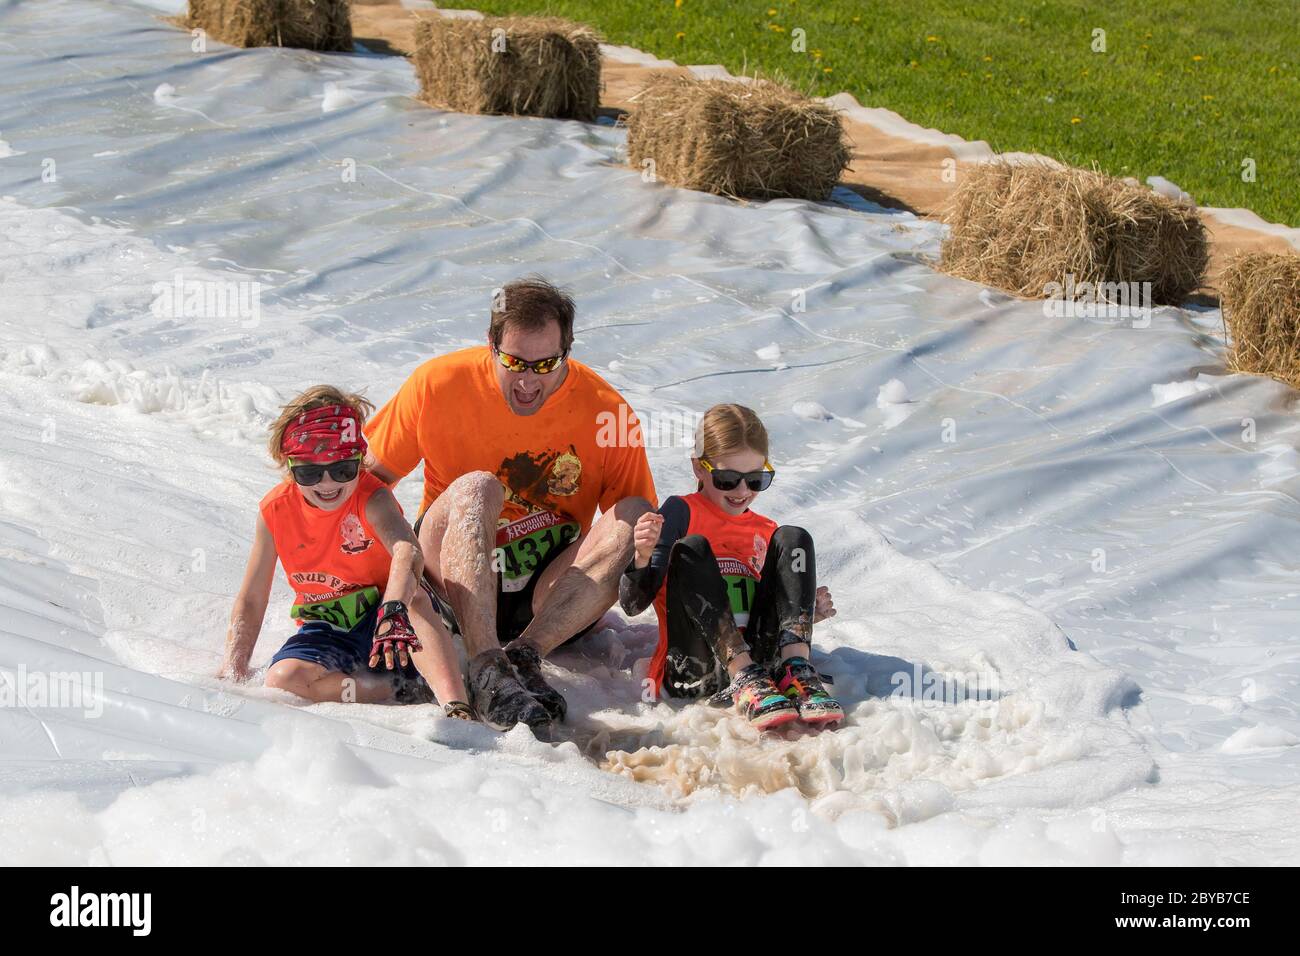 Poley Mountain, New Brunswick, Canada - June 10, 2017: Participating in the annual fundraiser 'Mud Run For Heart'. A man and two children slide down a Stock Photo